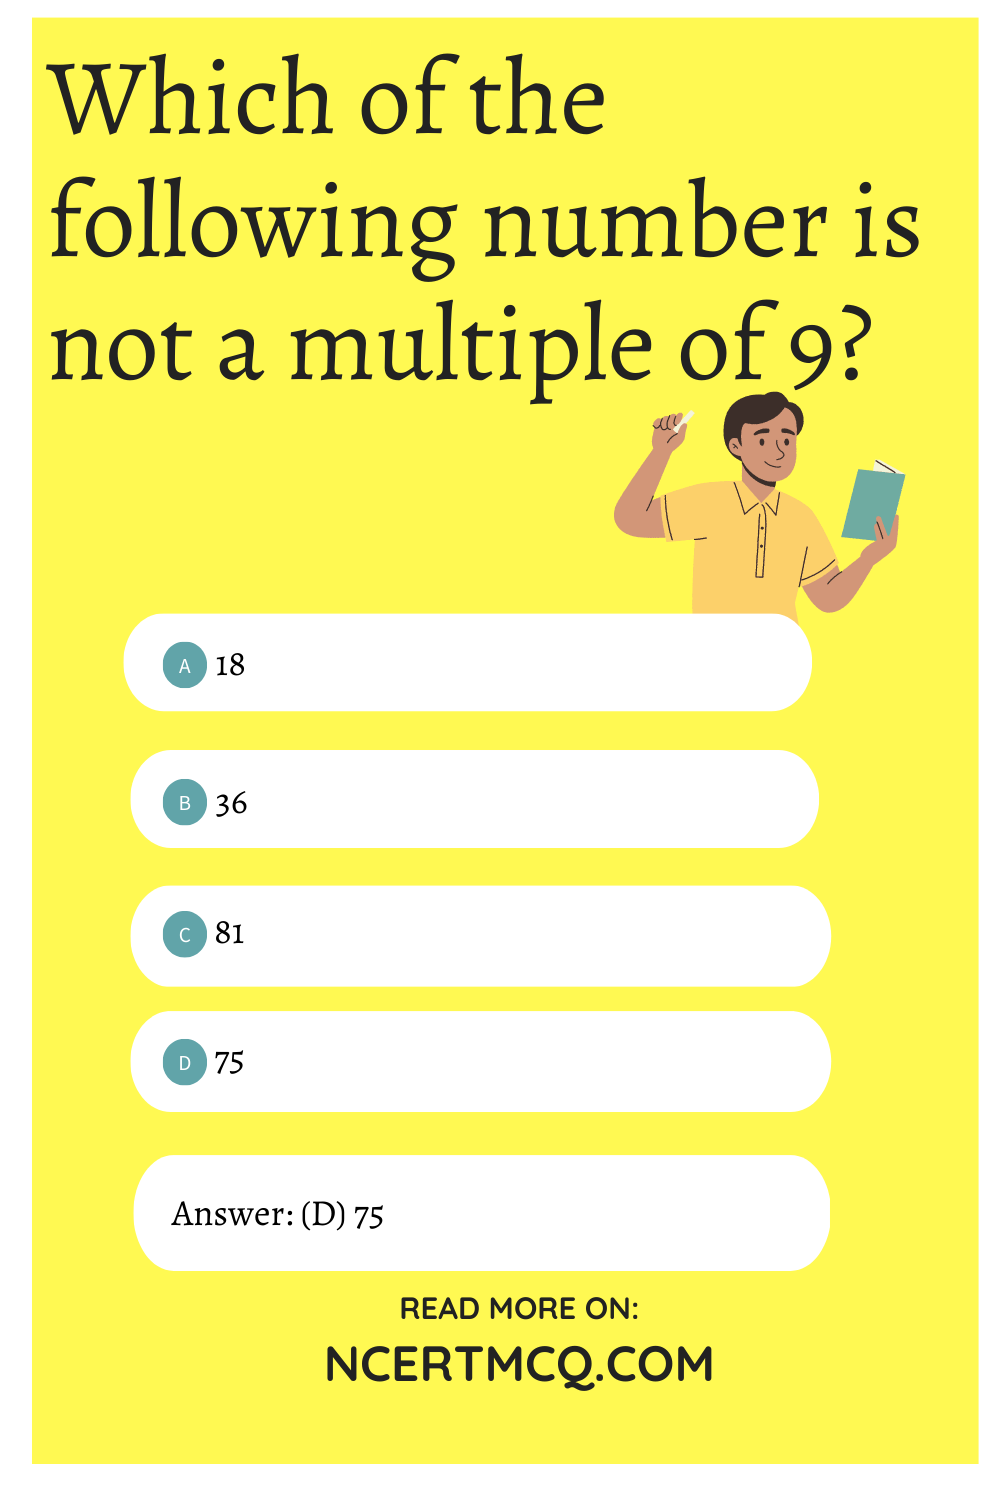 Which of the following number is not a multiple of 9?